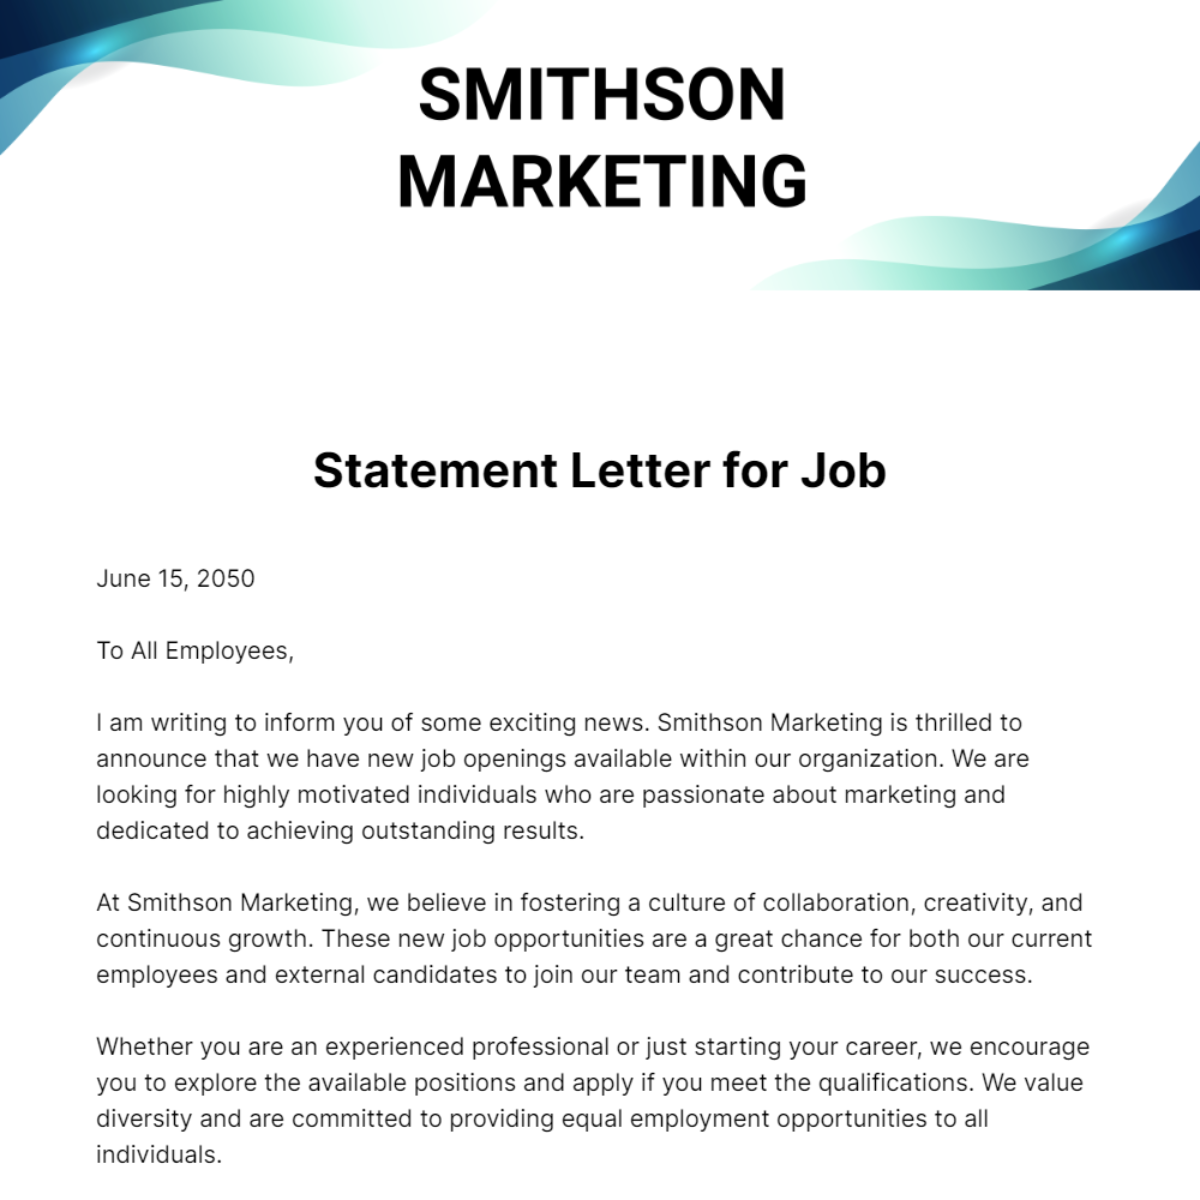 Statement Letter for Job Template